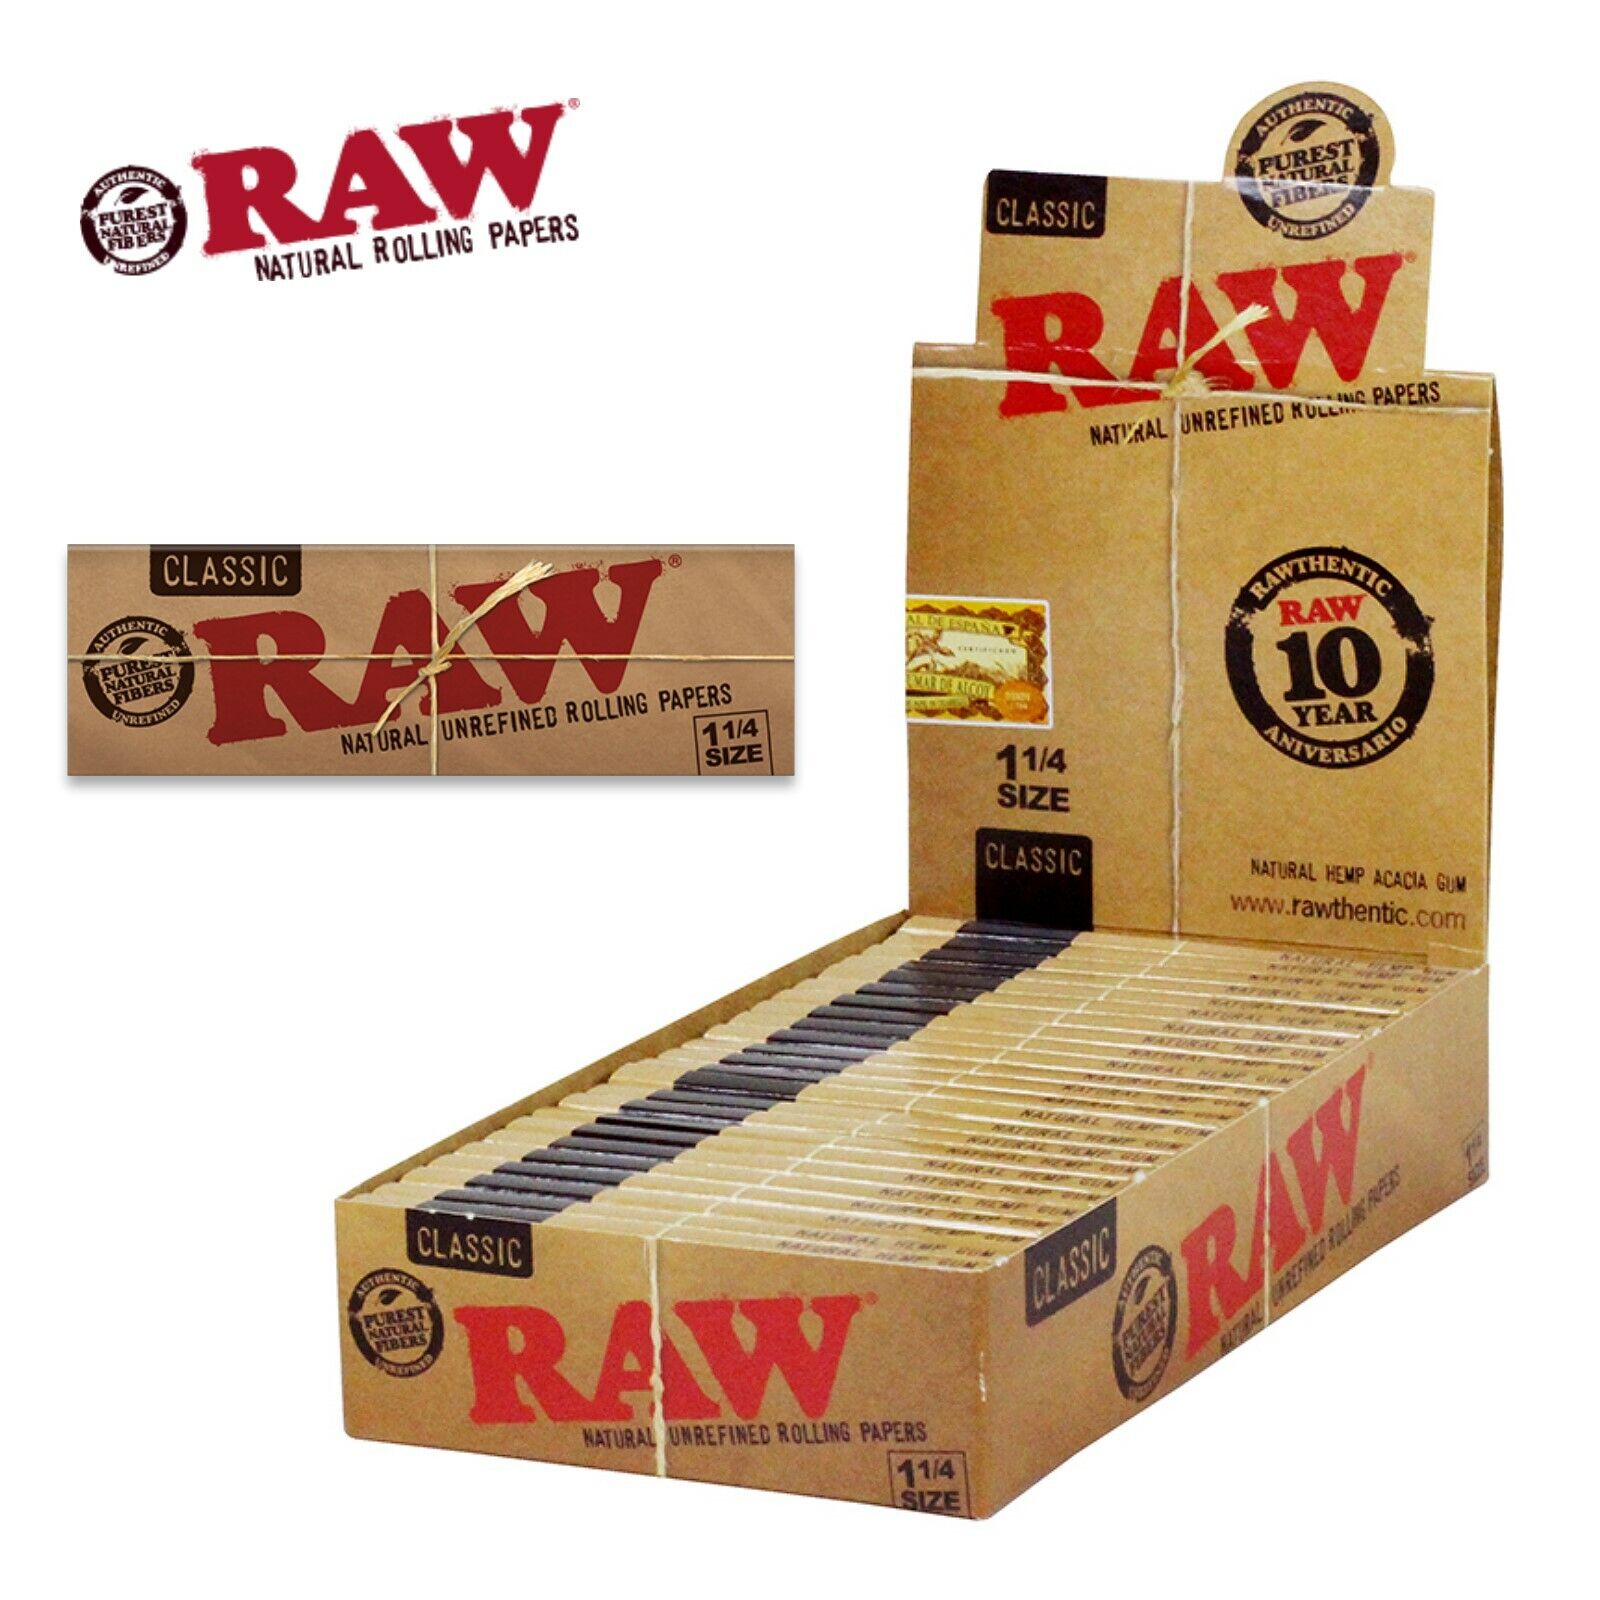 AUTHENTIC RAW Natural Classic1.25 1 1/4 Rolling Papers 24x FULL BOX - FREE SHIP. Available Now for 20.99